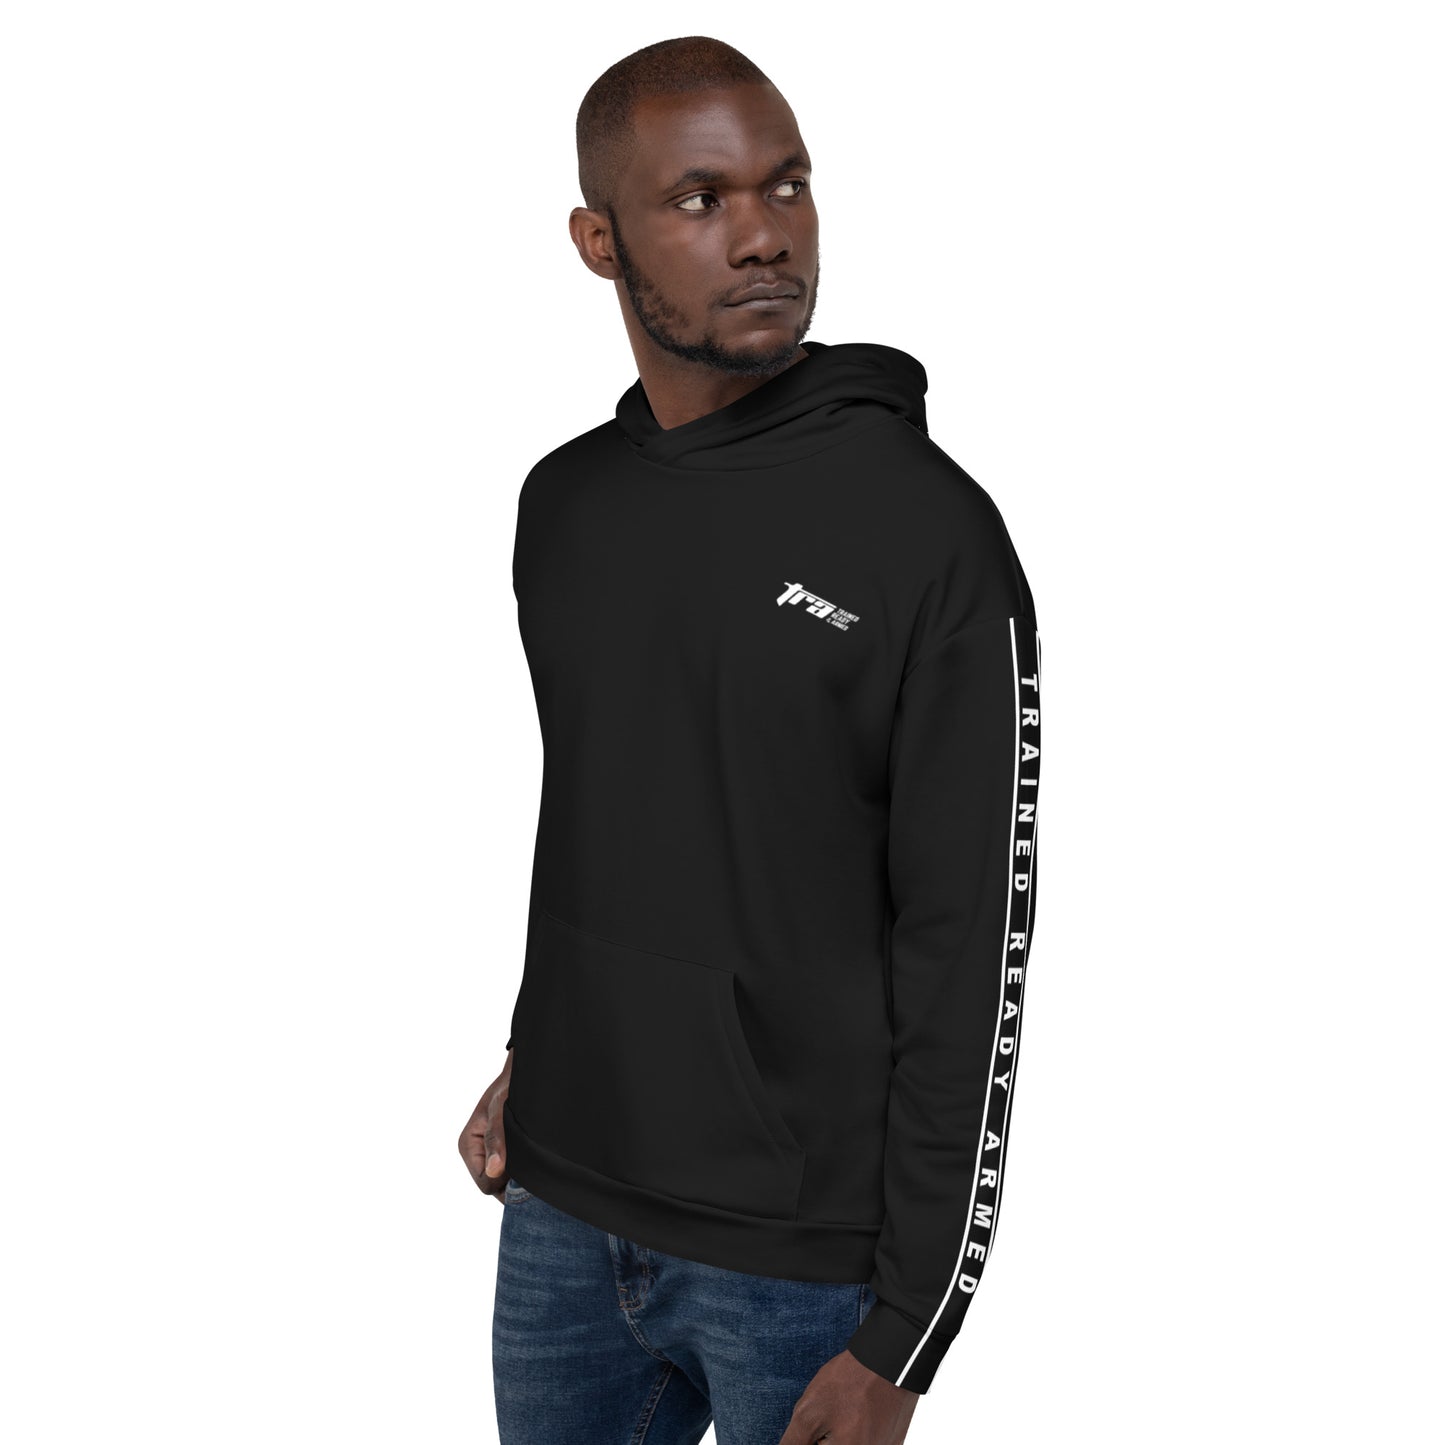 Trained Ready Armed Lining Designed Black & White Hoodie - Trained Ready Armed Apparel